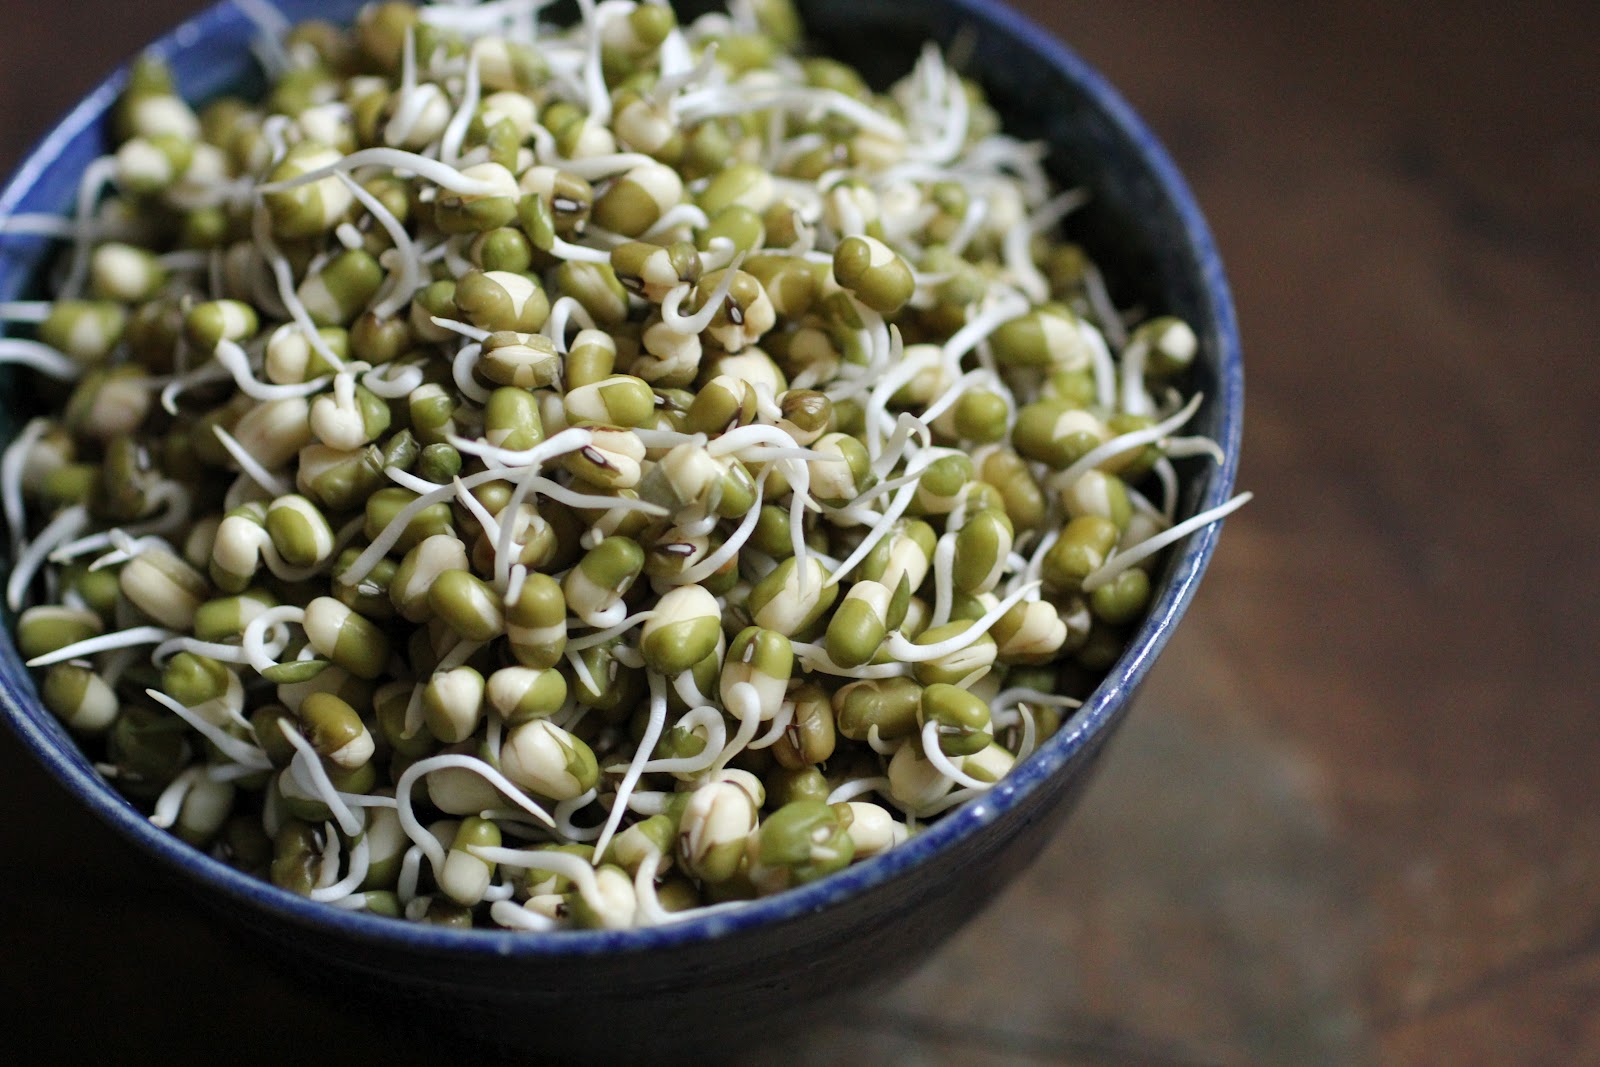 5 Best types of sprouts and their health benefits, sprouting mung beans